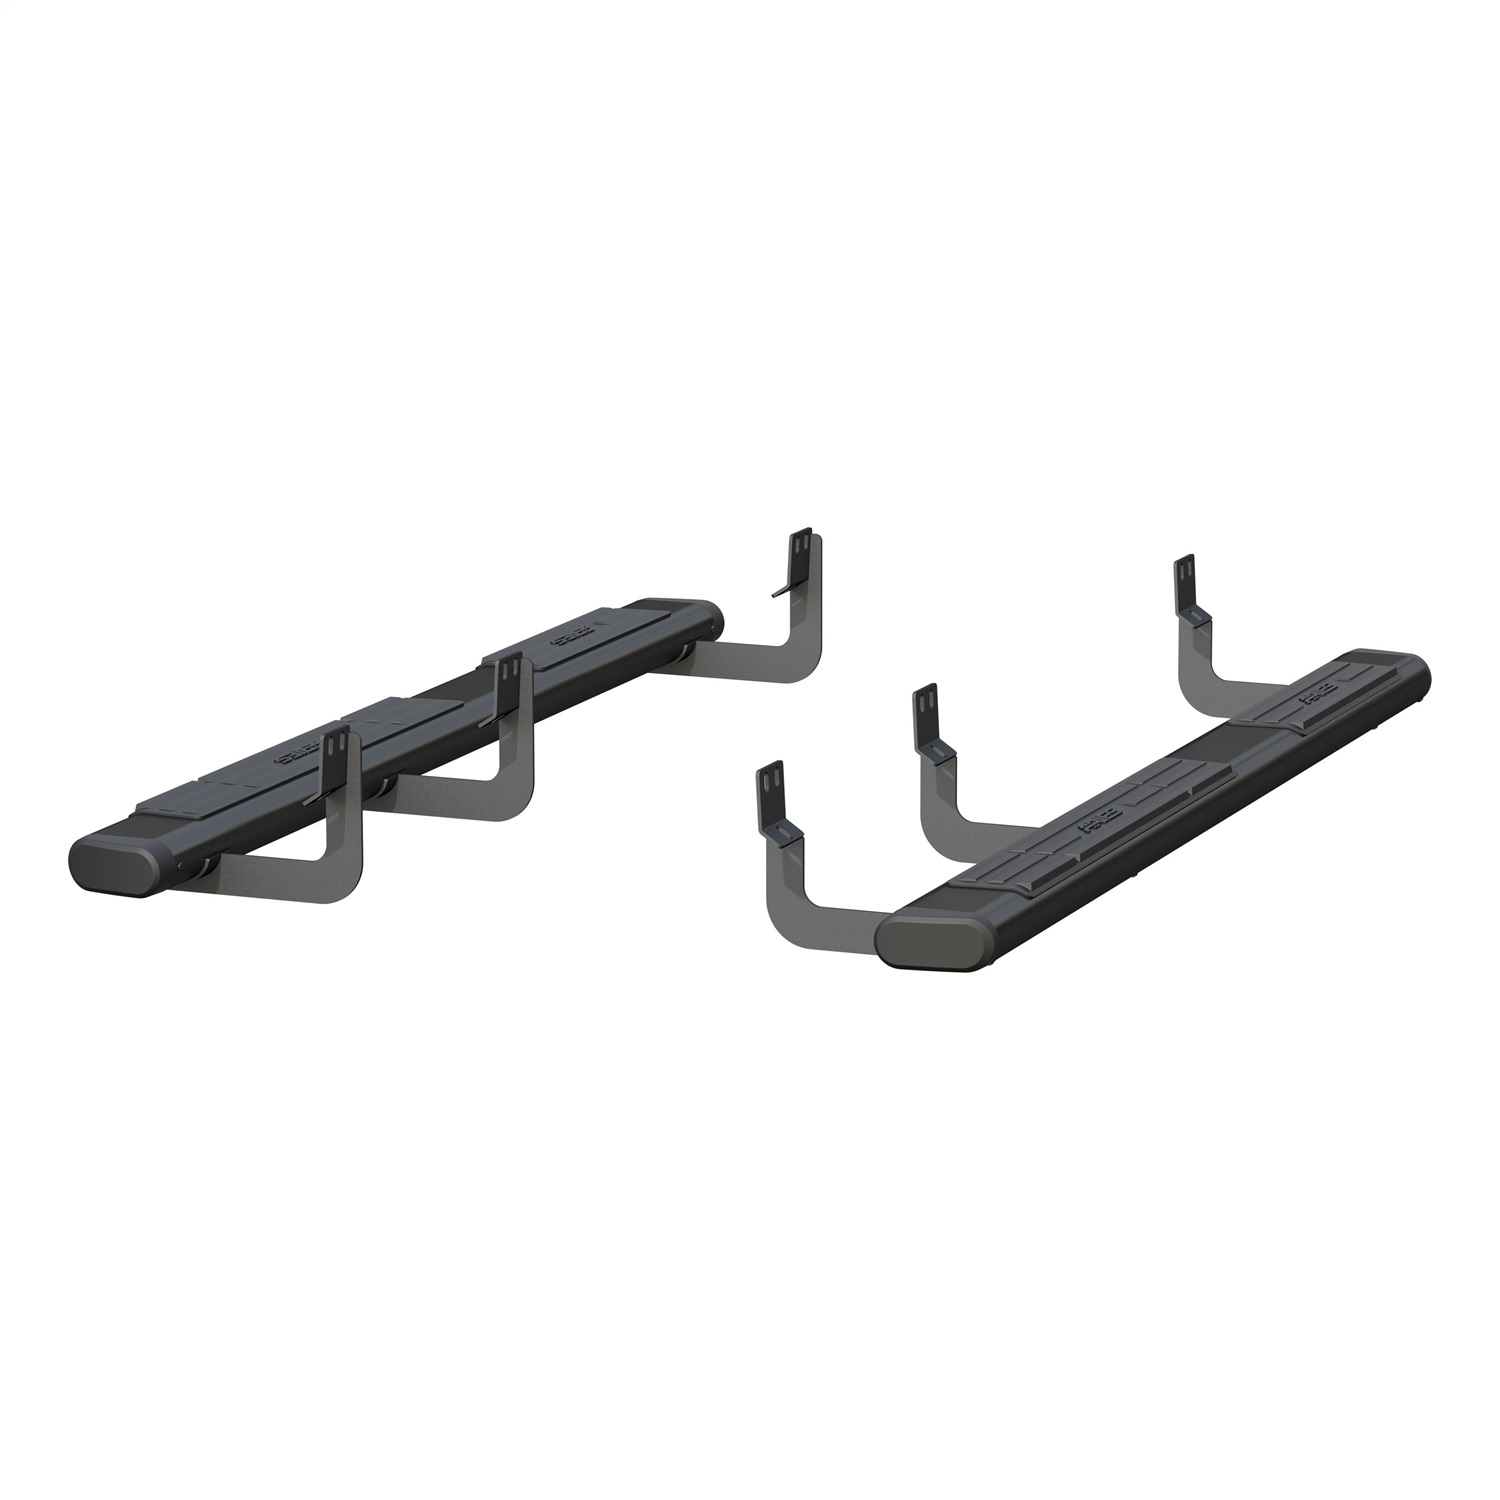 Aries Automotive 4445034 The Standard; 6 in. Oval Nerf Bar/Mounting Brackets The Standard; 6 in. Oval Nerf Bar/Mounting Brackets; Includes PN[B2875/4519];